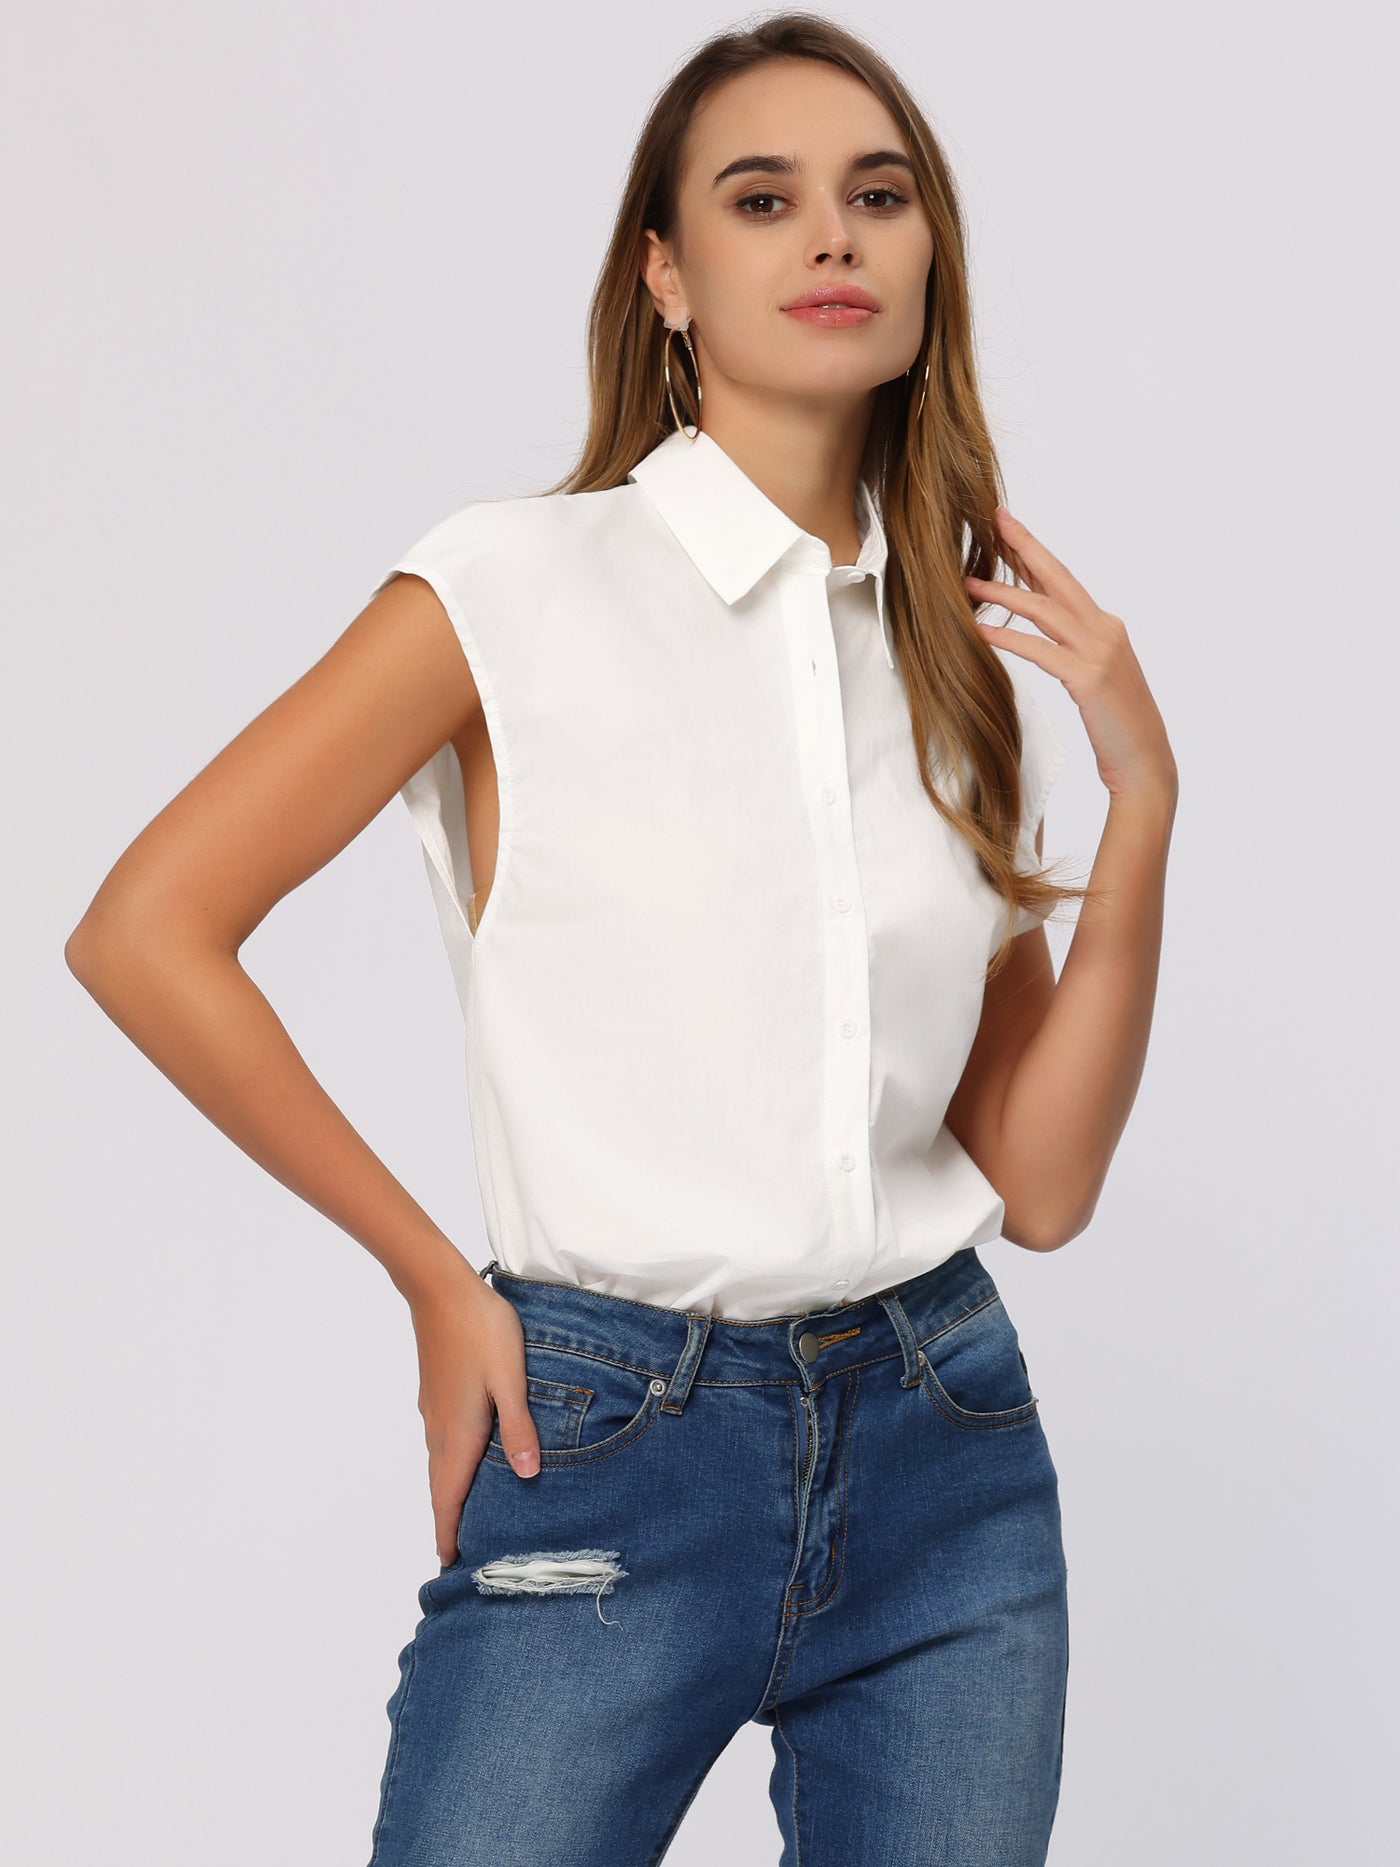 Allegra K Cotton Business Casual Shirt for Button Down Cap Sleeve Blouse Tops